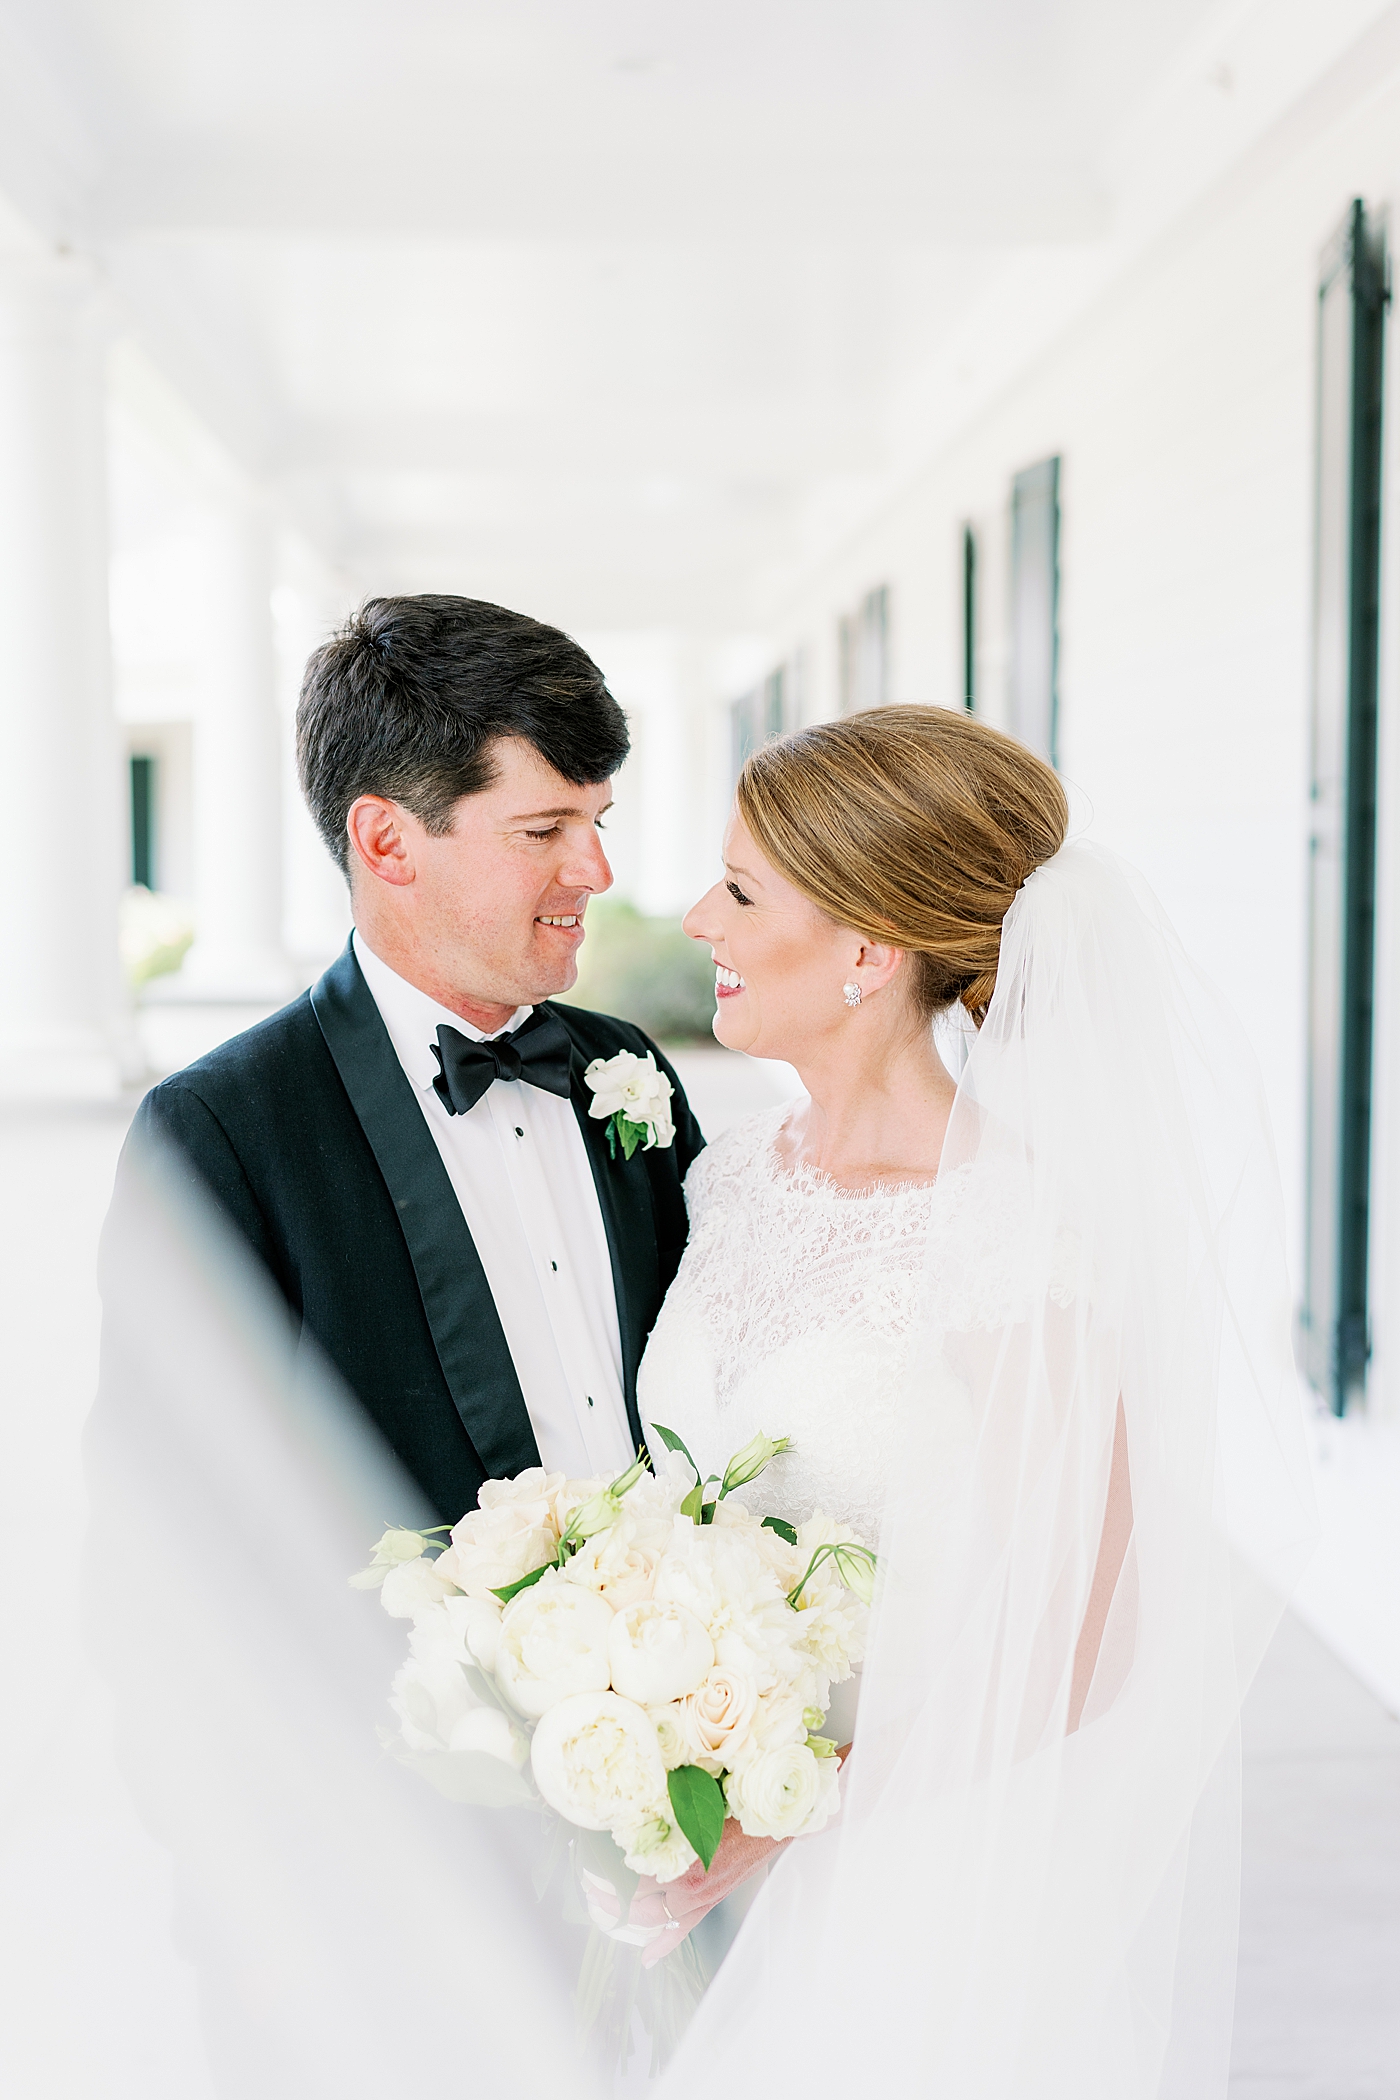 Bride and groom smiling at each other | Image by Annie Laura Photo